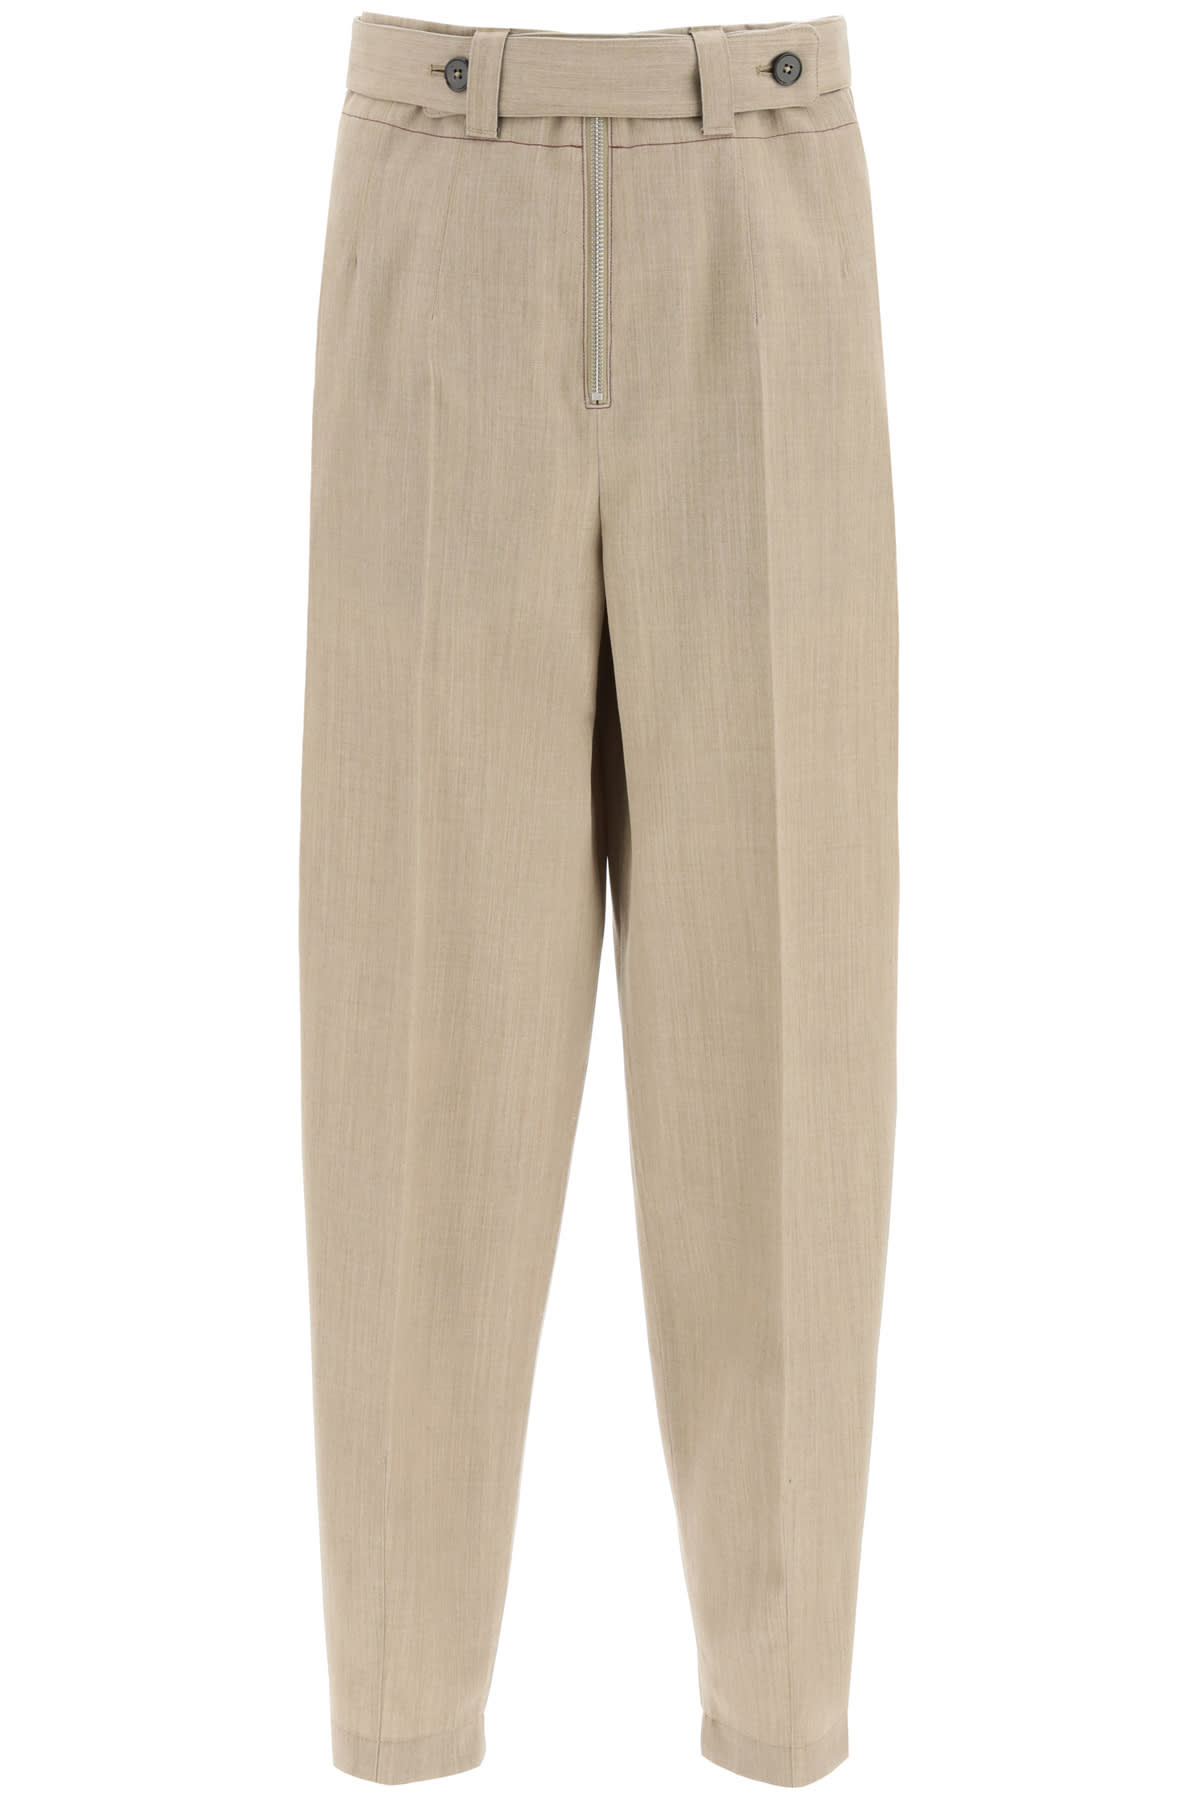 Jil Sander Wool Grisaille Trousers